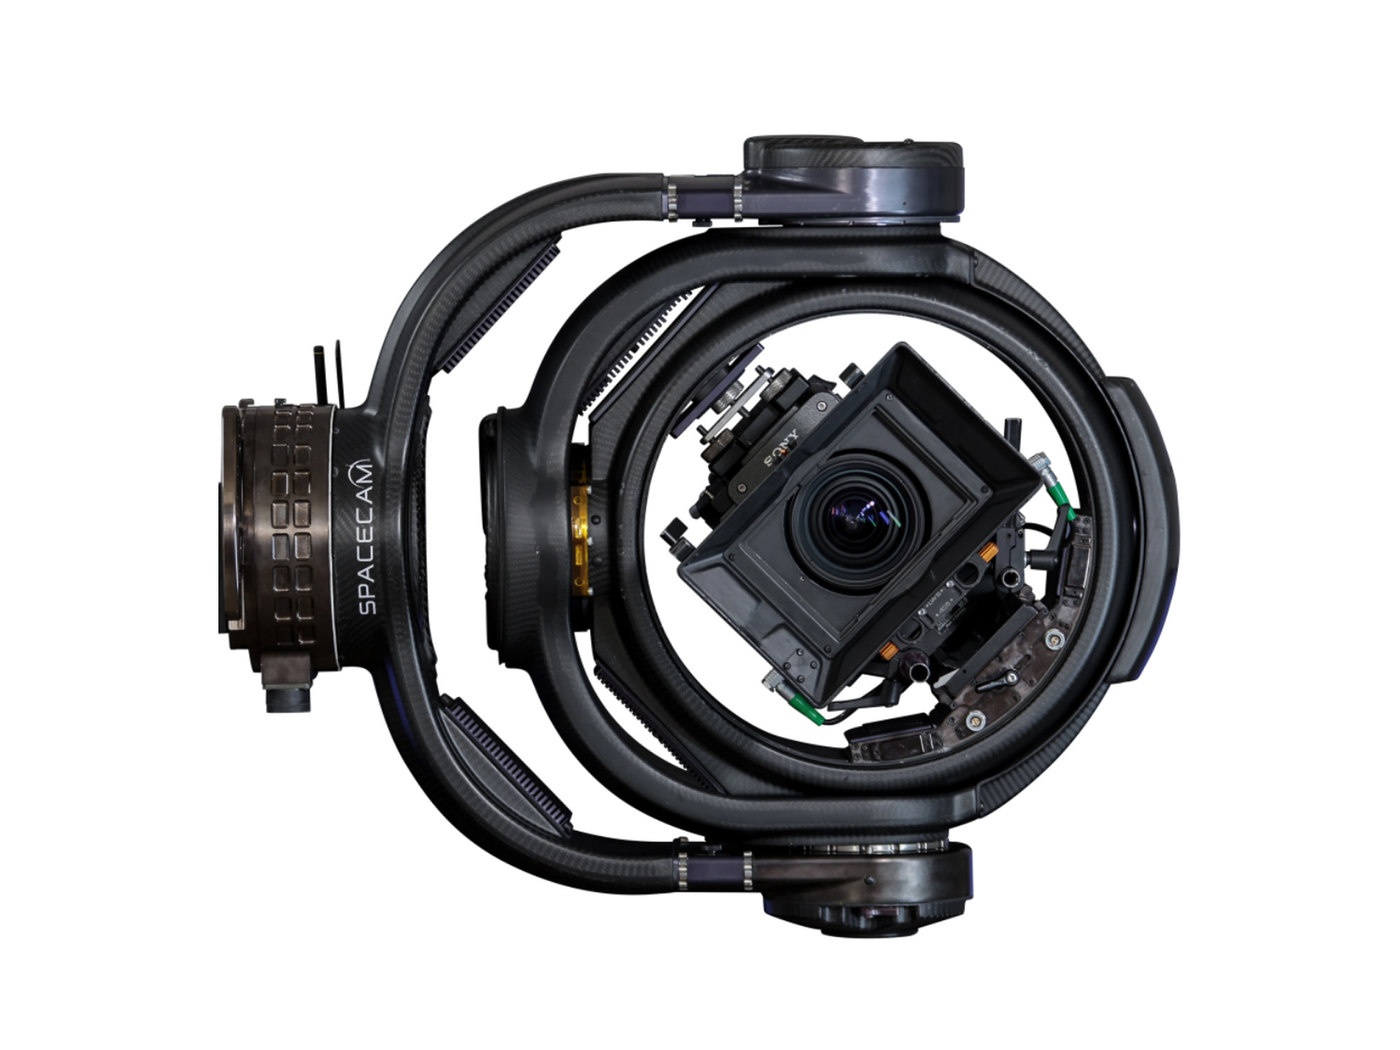 Super Gyroscope Gimbals (add-on kit) - From